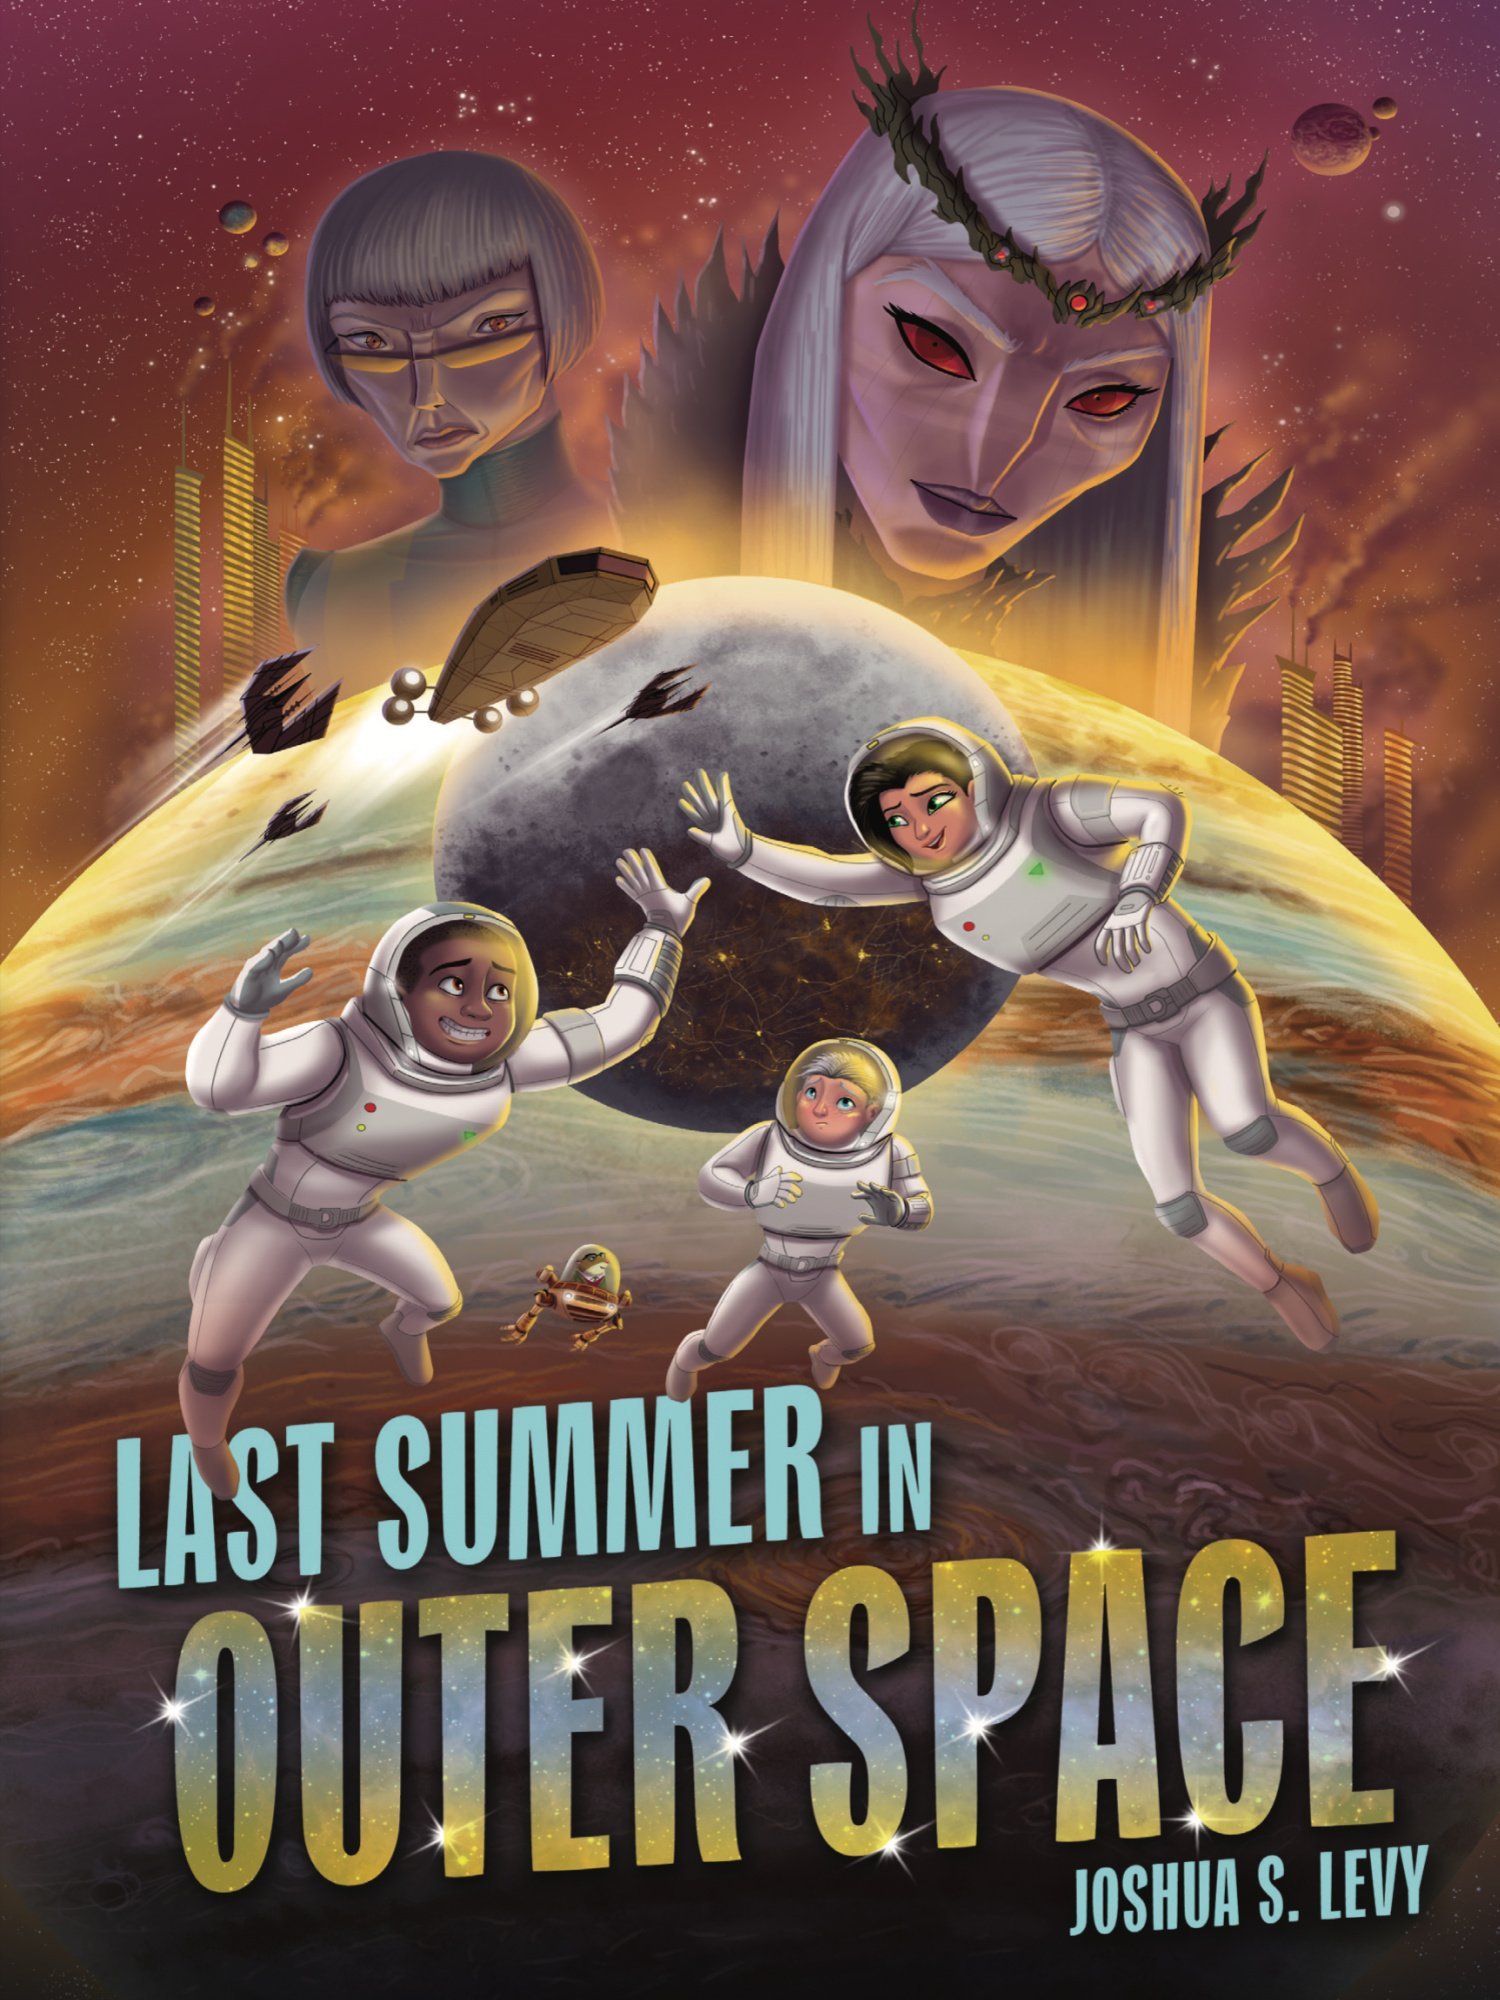 LAST+SUMMER+IN+OUTER+SPACE+--+JPEG.jpg